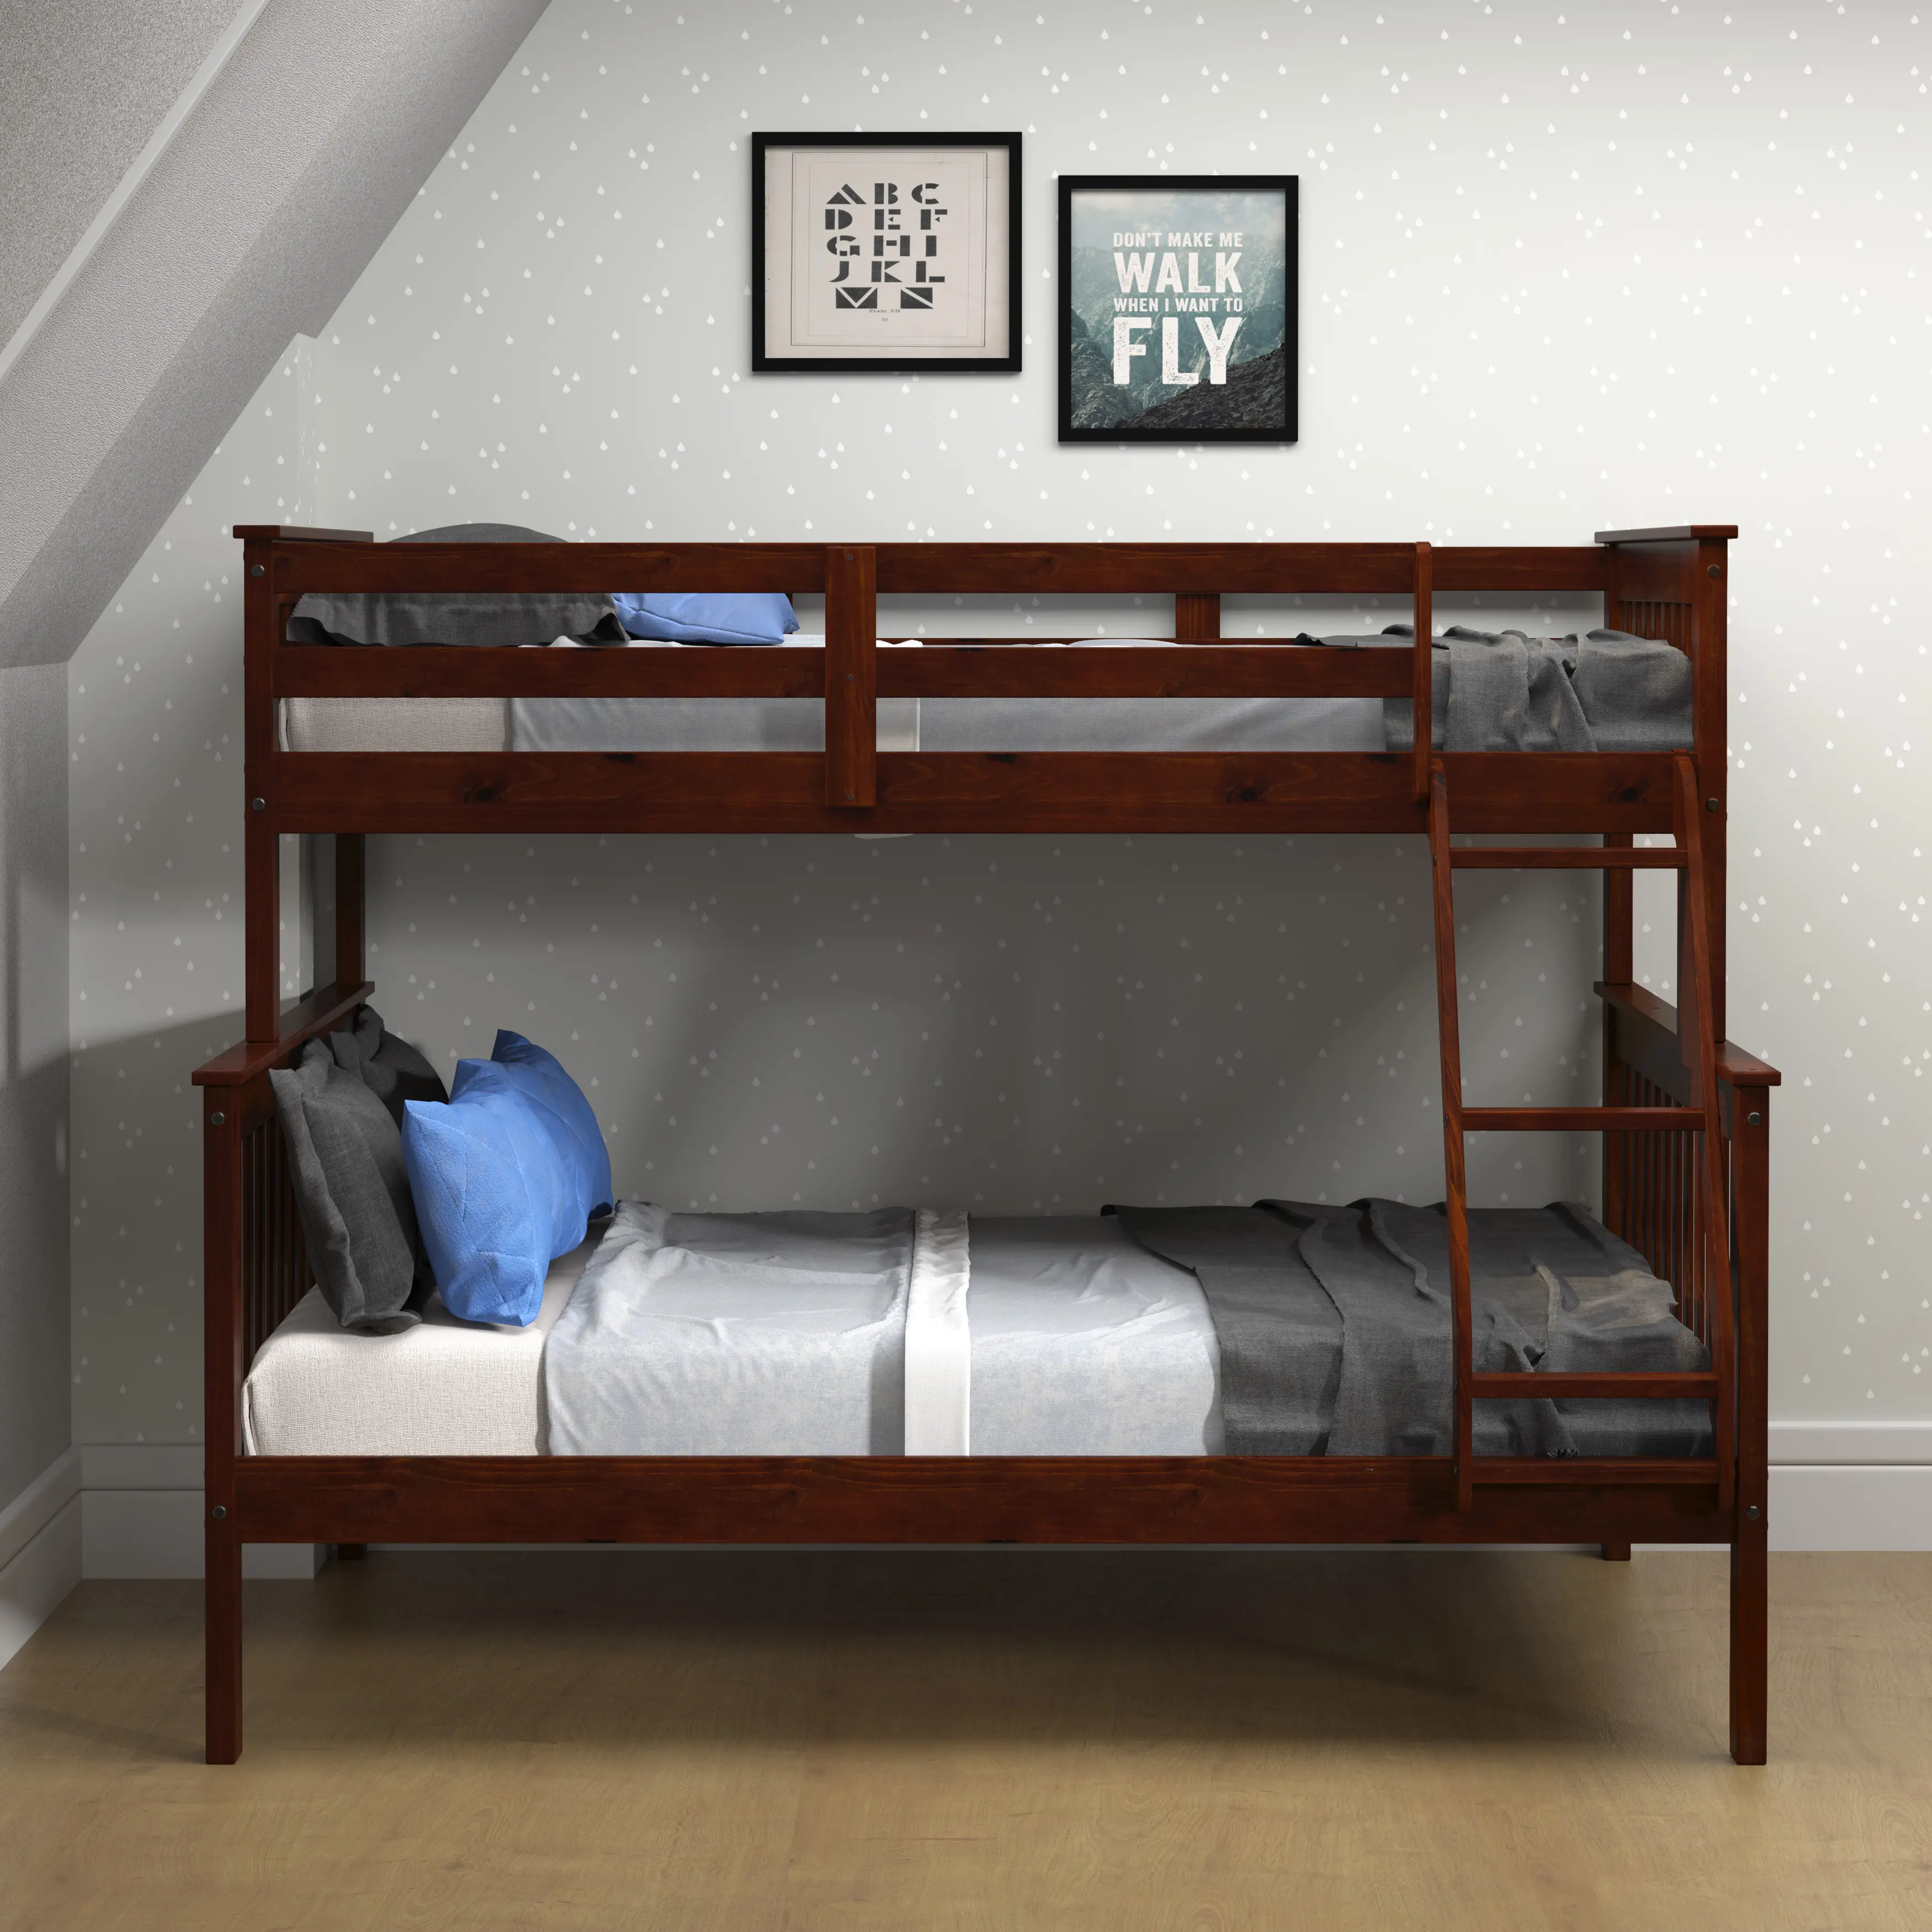 122-3-TFCP Dark Cappuccino Brown Twin-over-Full Bunk Bed - Cr sku 122-3-TFCP